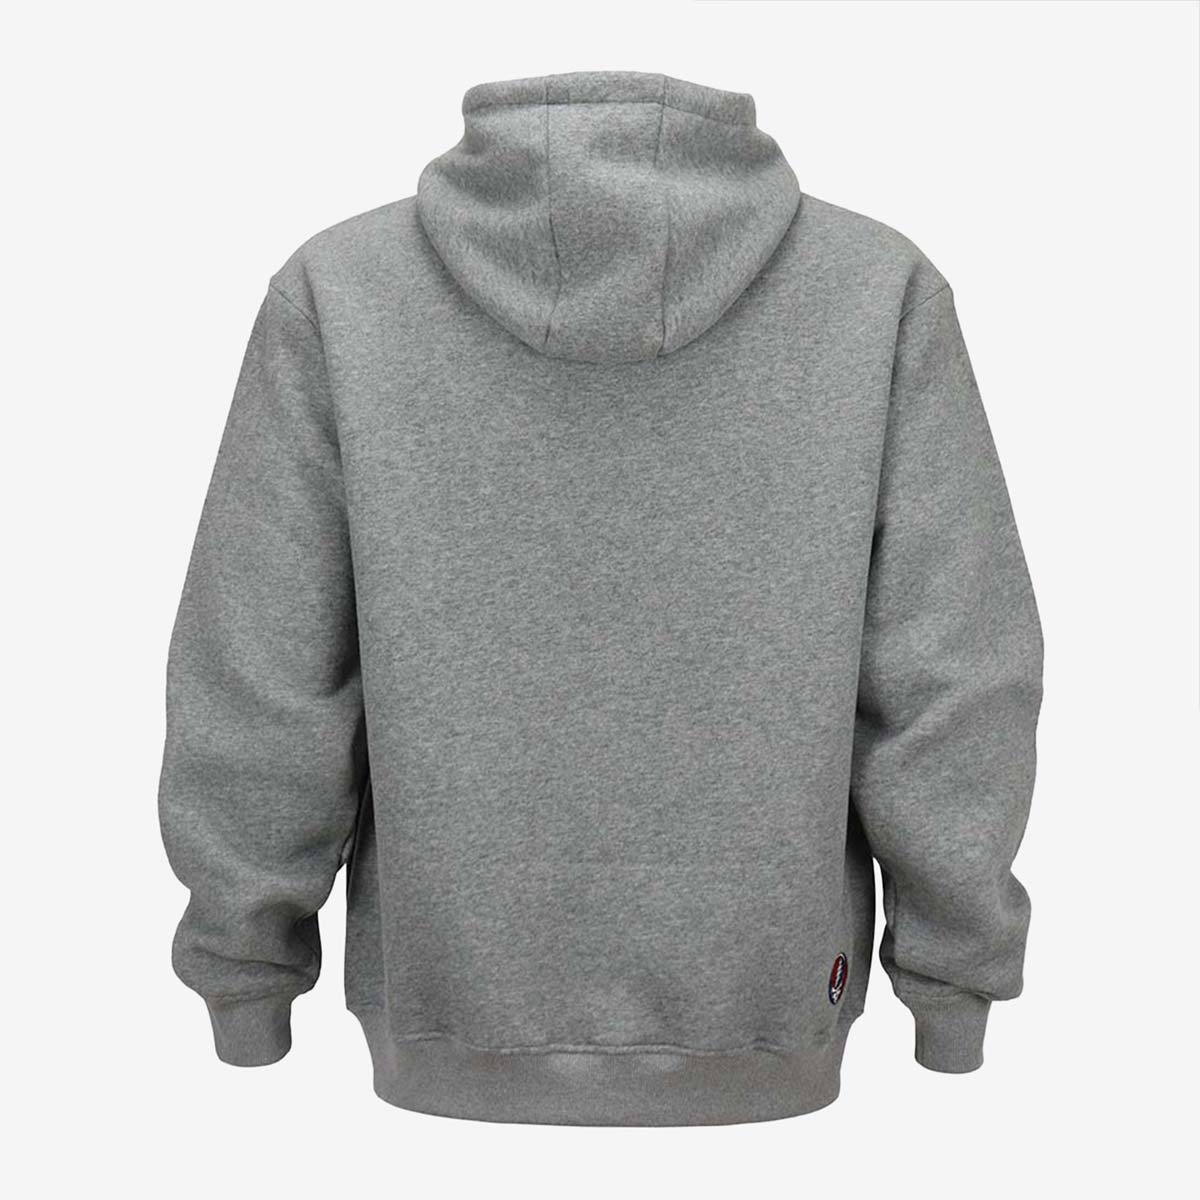 The Grateful Dead Classic Grey Hoodie with Bold Big Stealie